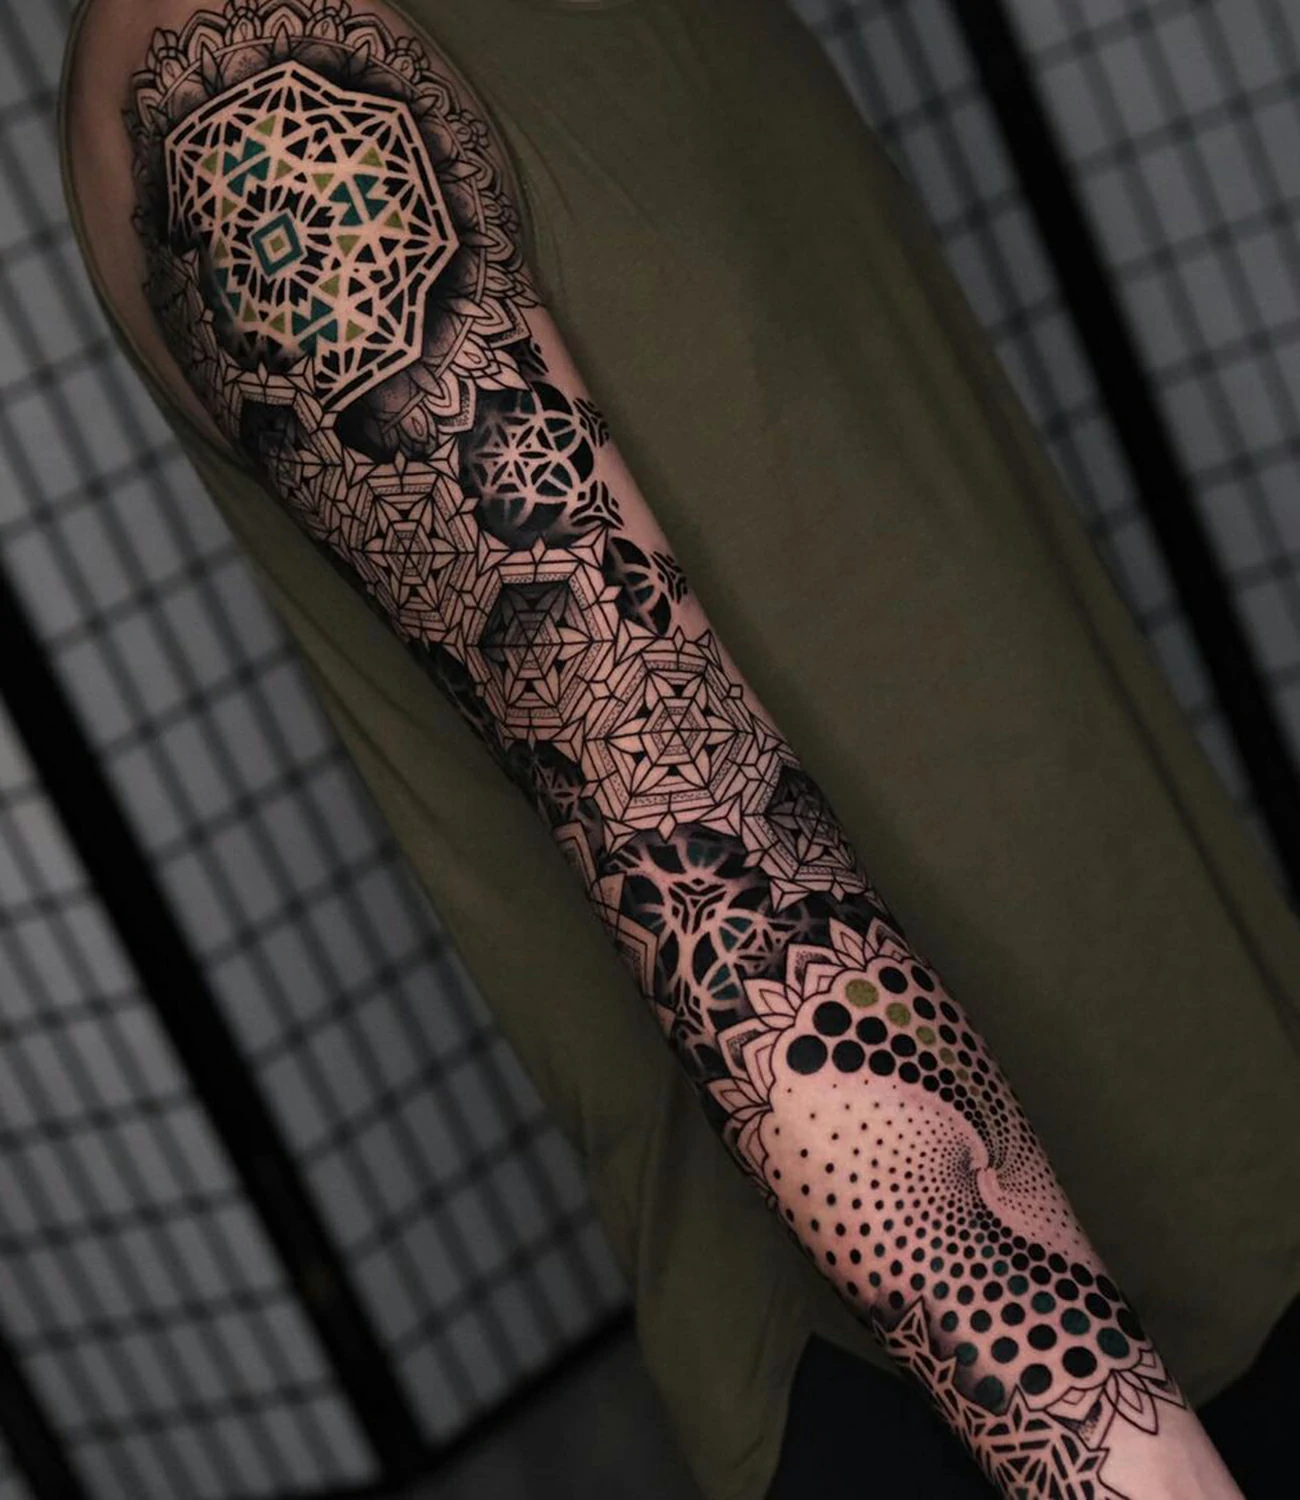 Geometric Sleeve Tattoo: A geometric sleeve tattoo incorporates various shapes and patterns to create a unified and intricate design covering the entire arm.